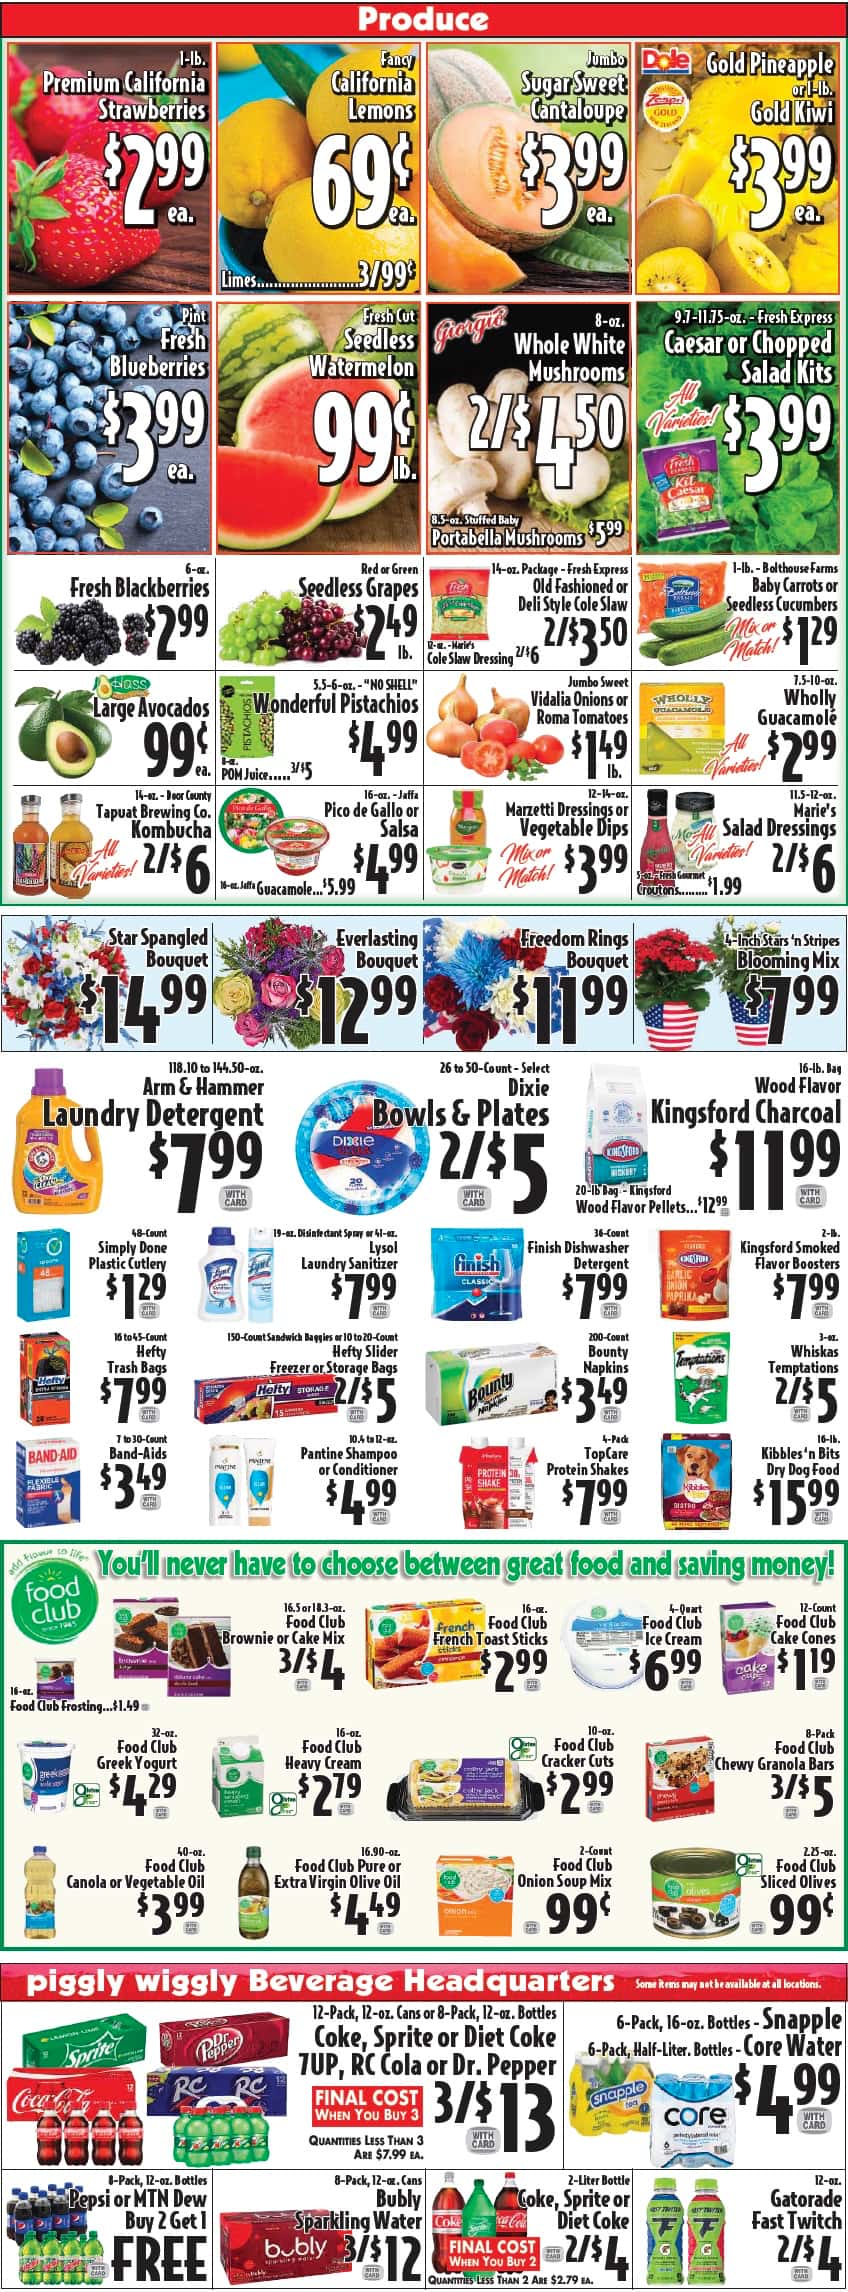 piggly wiggly florence sc weekly ad